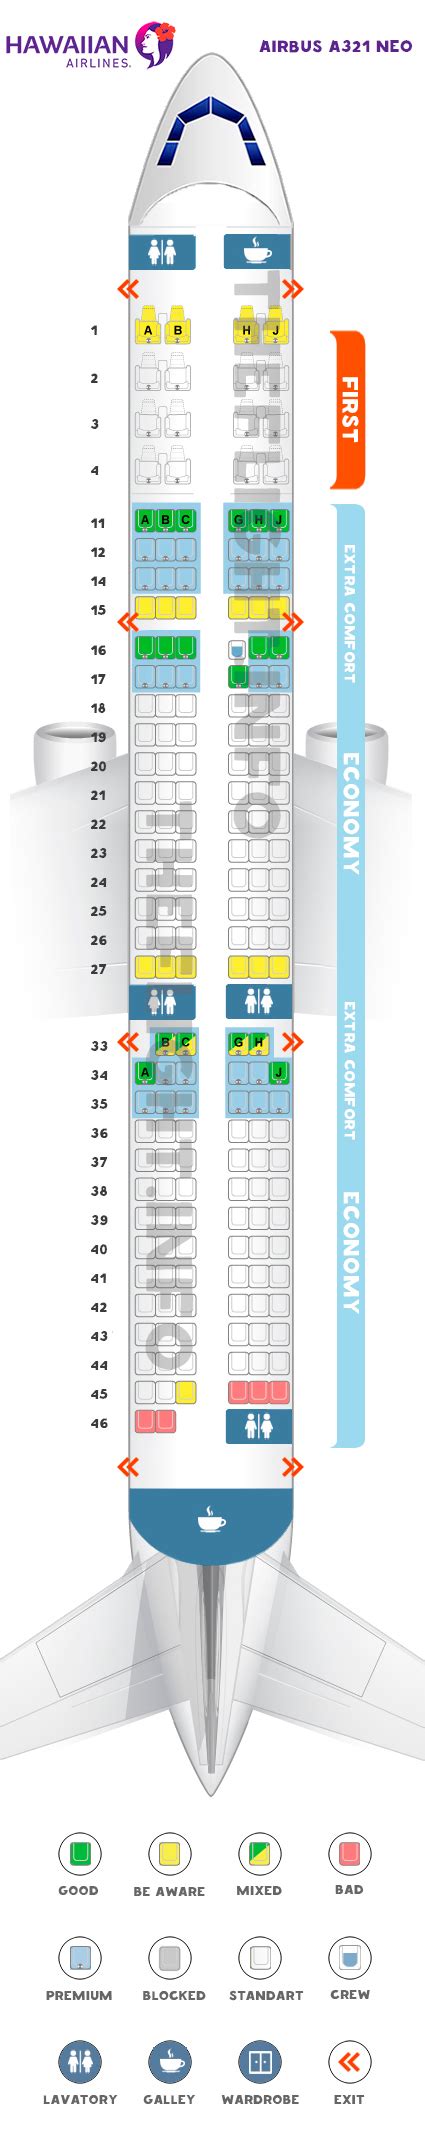 Seat Map Airbus A321neo Hawaiian Airlines Best Seats In The Plane